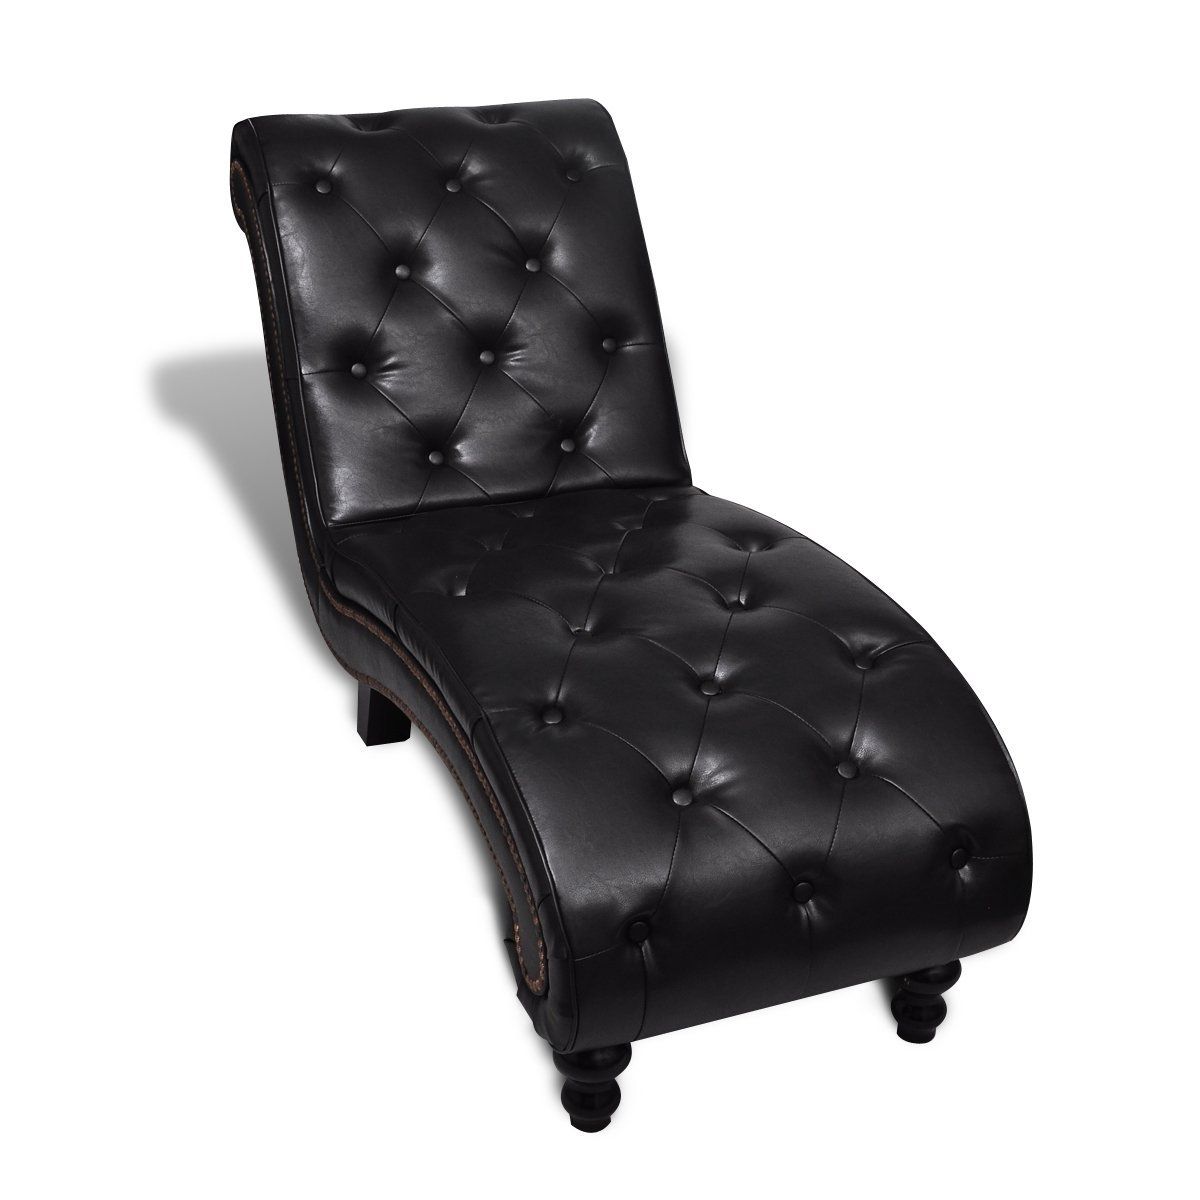 Most Current Black Tufted Faux Leather Chaise Lounge Chair For Bedroom Pertaining To Black Leather Chaises (View 9 of 15)